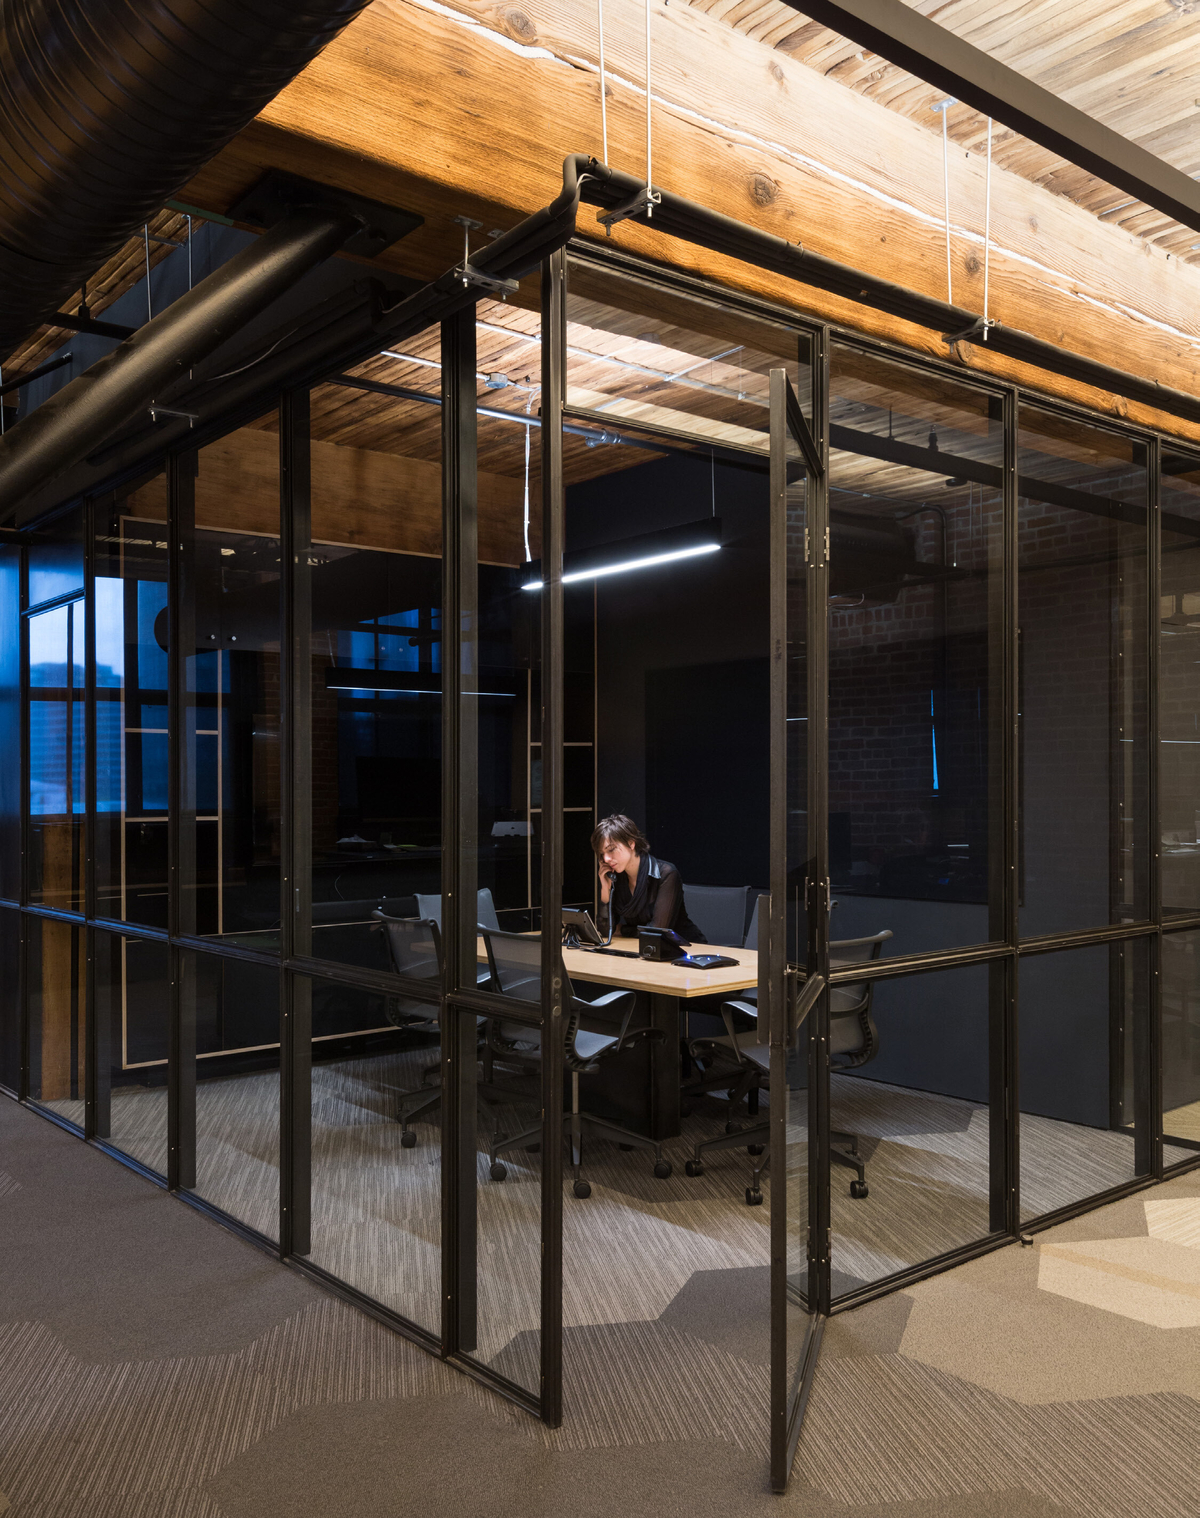 Interior evening view of Slack Headquarters, showing century-old timber post-and-beam construction with wood ceiling timbers above modern glass office and tech worker inside